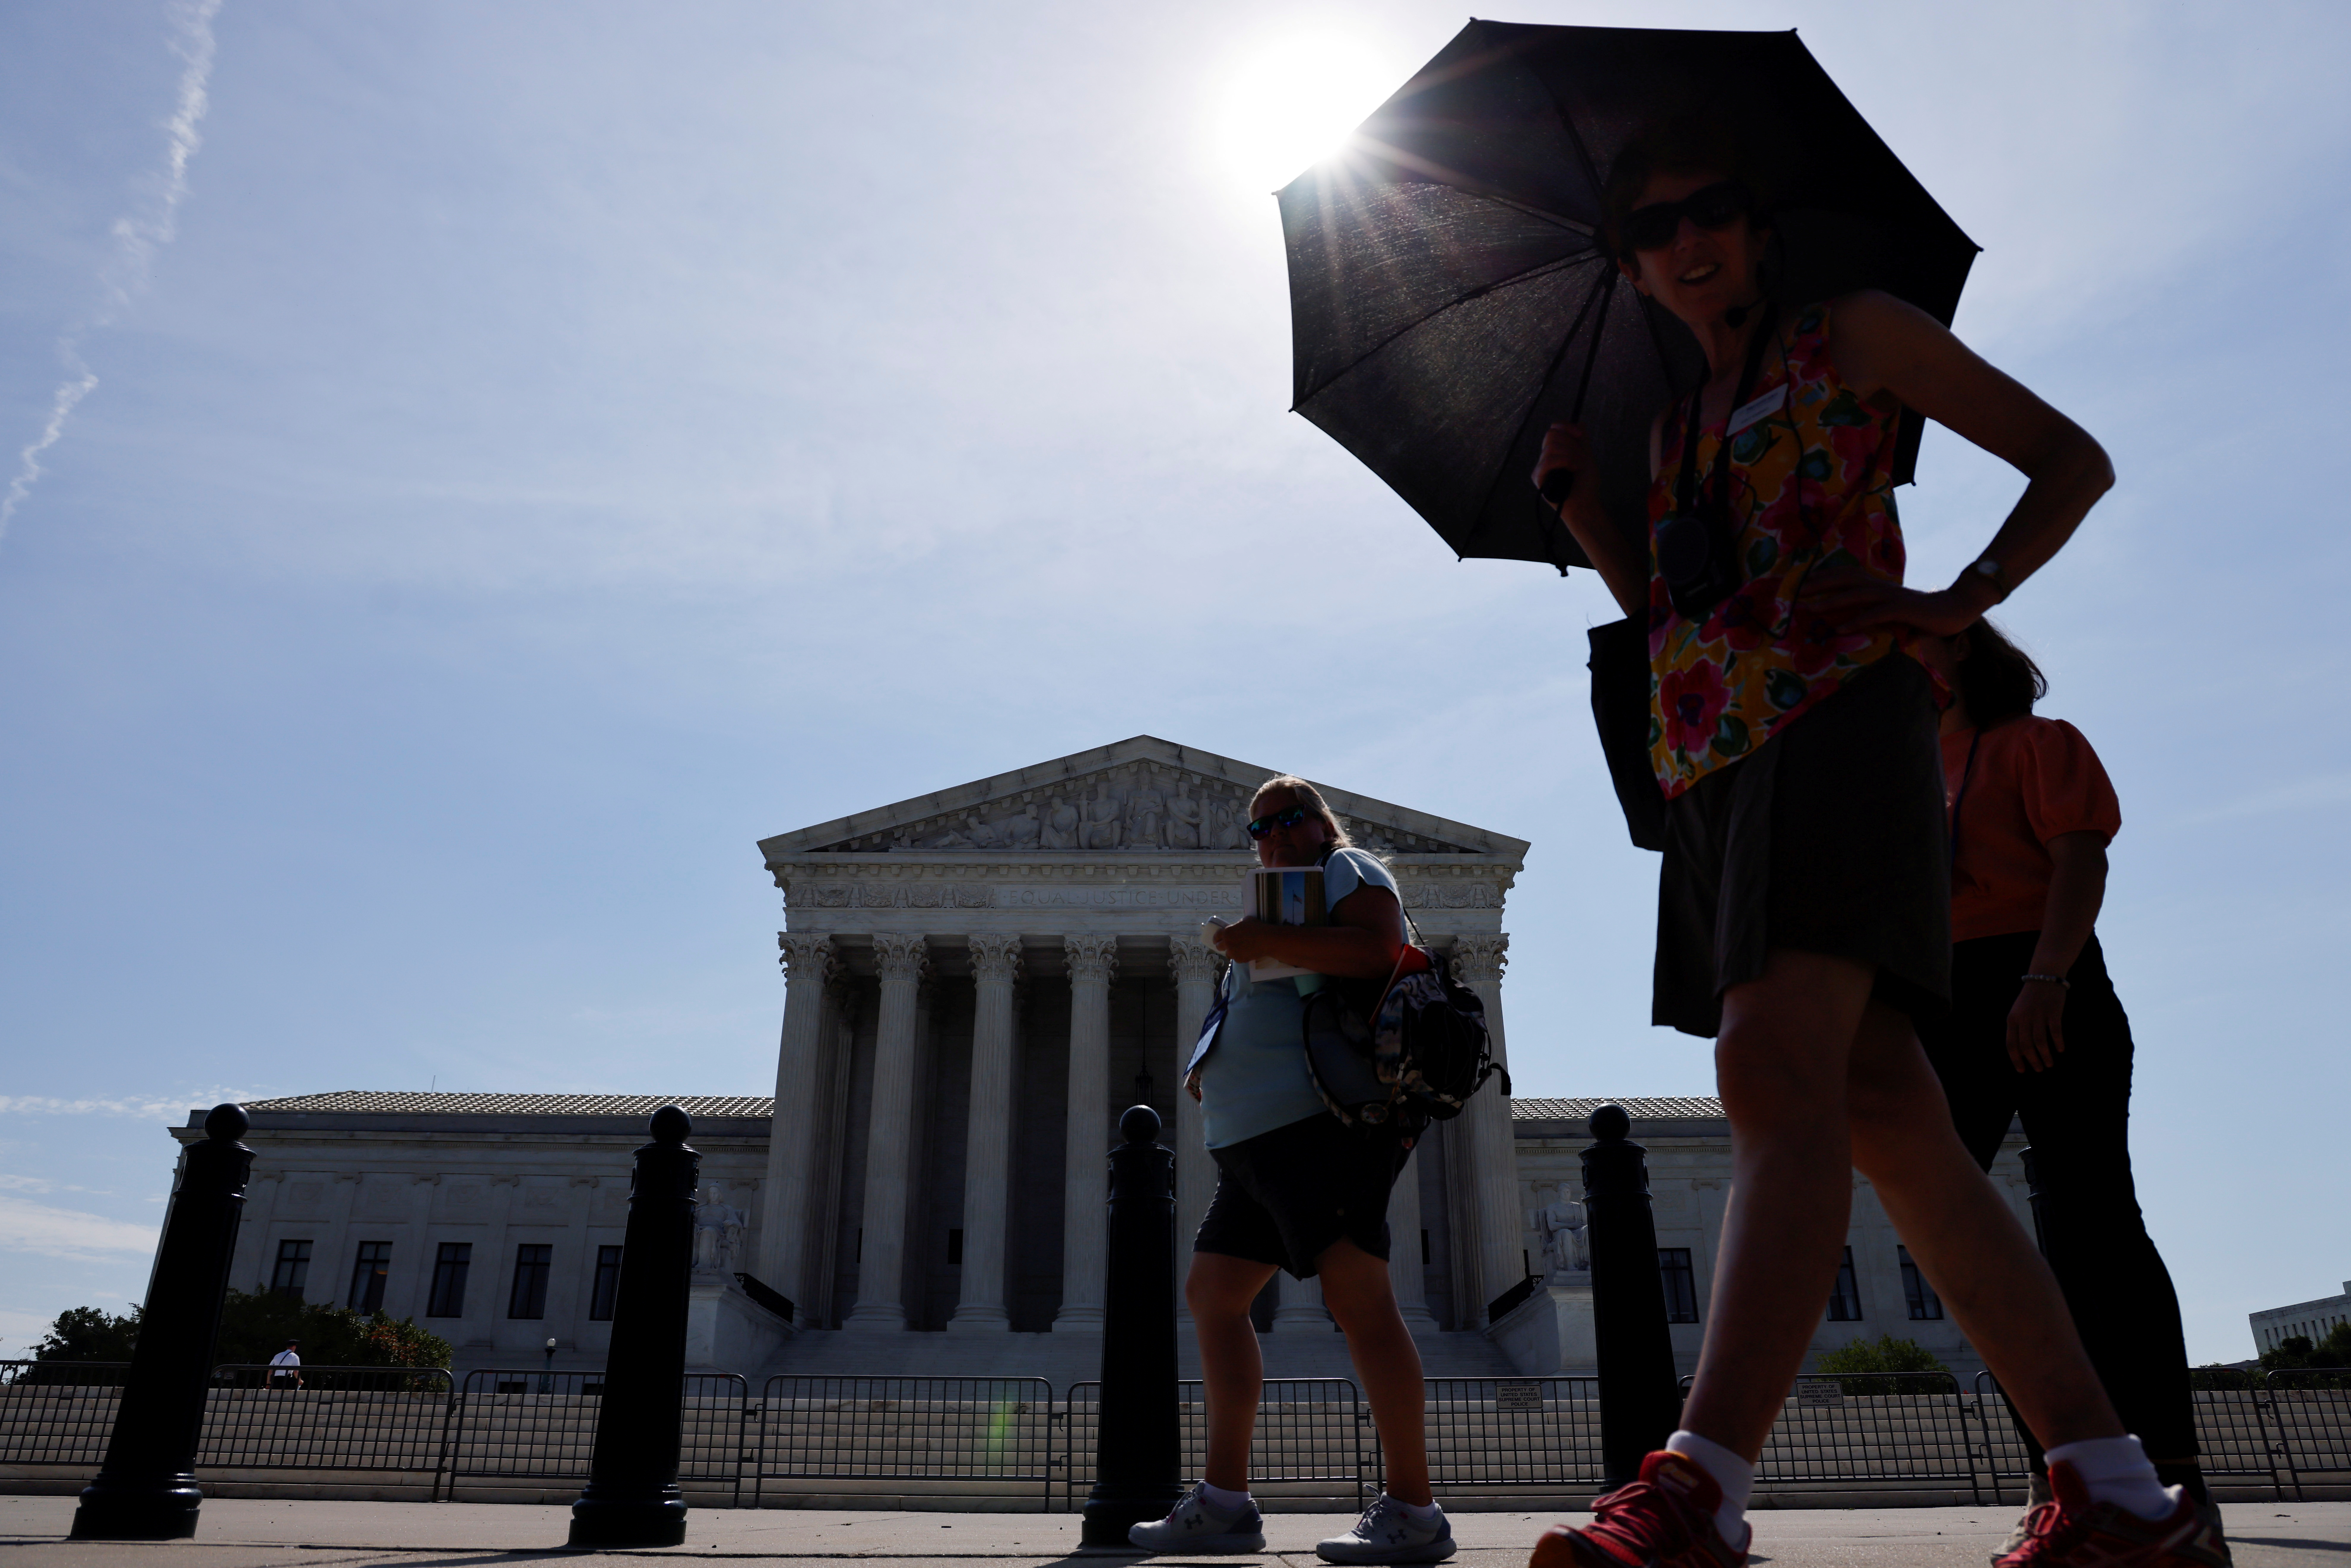 A tour group walks past the front of the U.S. Supreme Court building in Washington